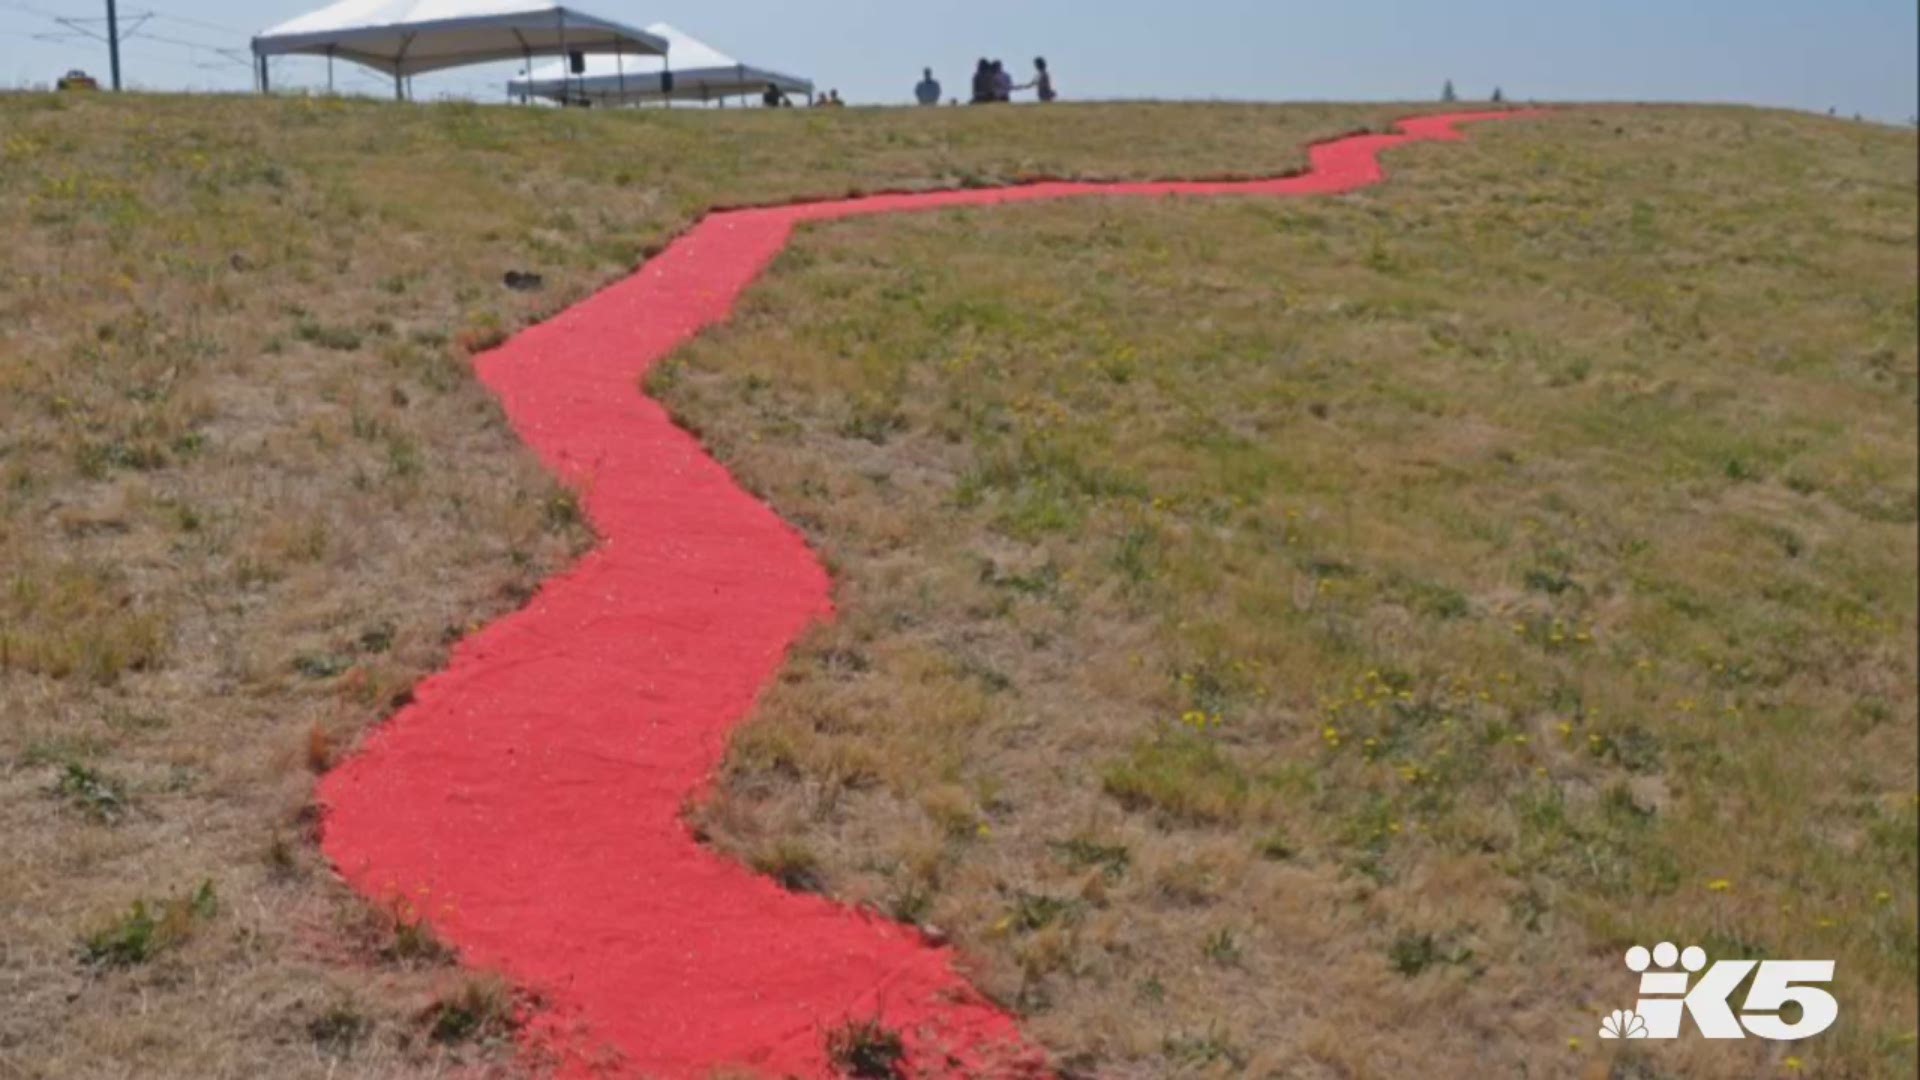 “Red Sand Project: US-MX” is a 350-foot-long red sand path pathway at Sea-Tac Airport that replicates the U.S.-Mexico border and aims to draw attention to human trafficking.